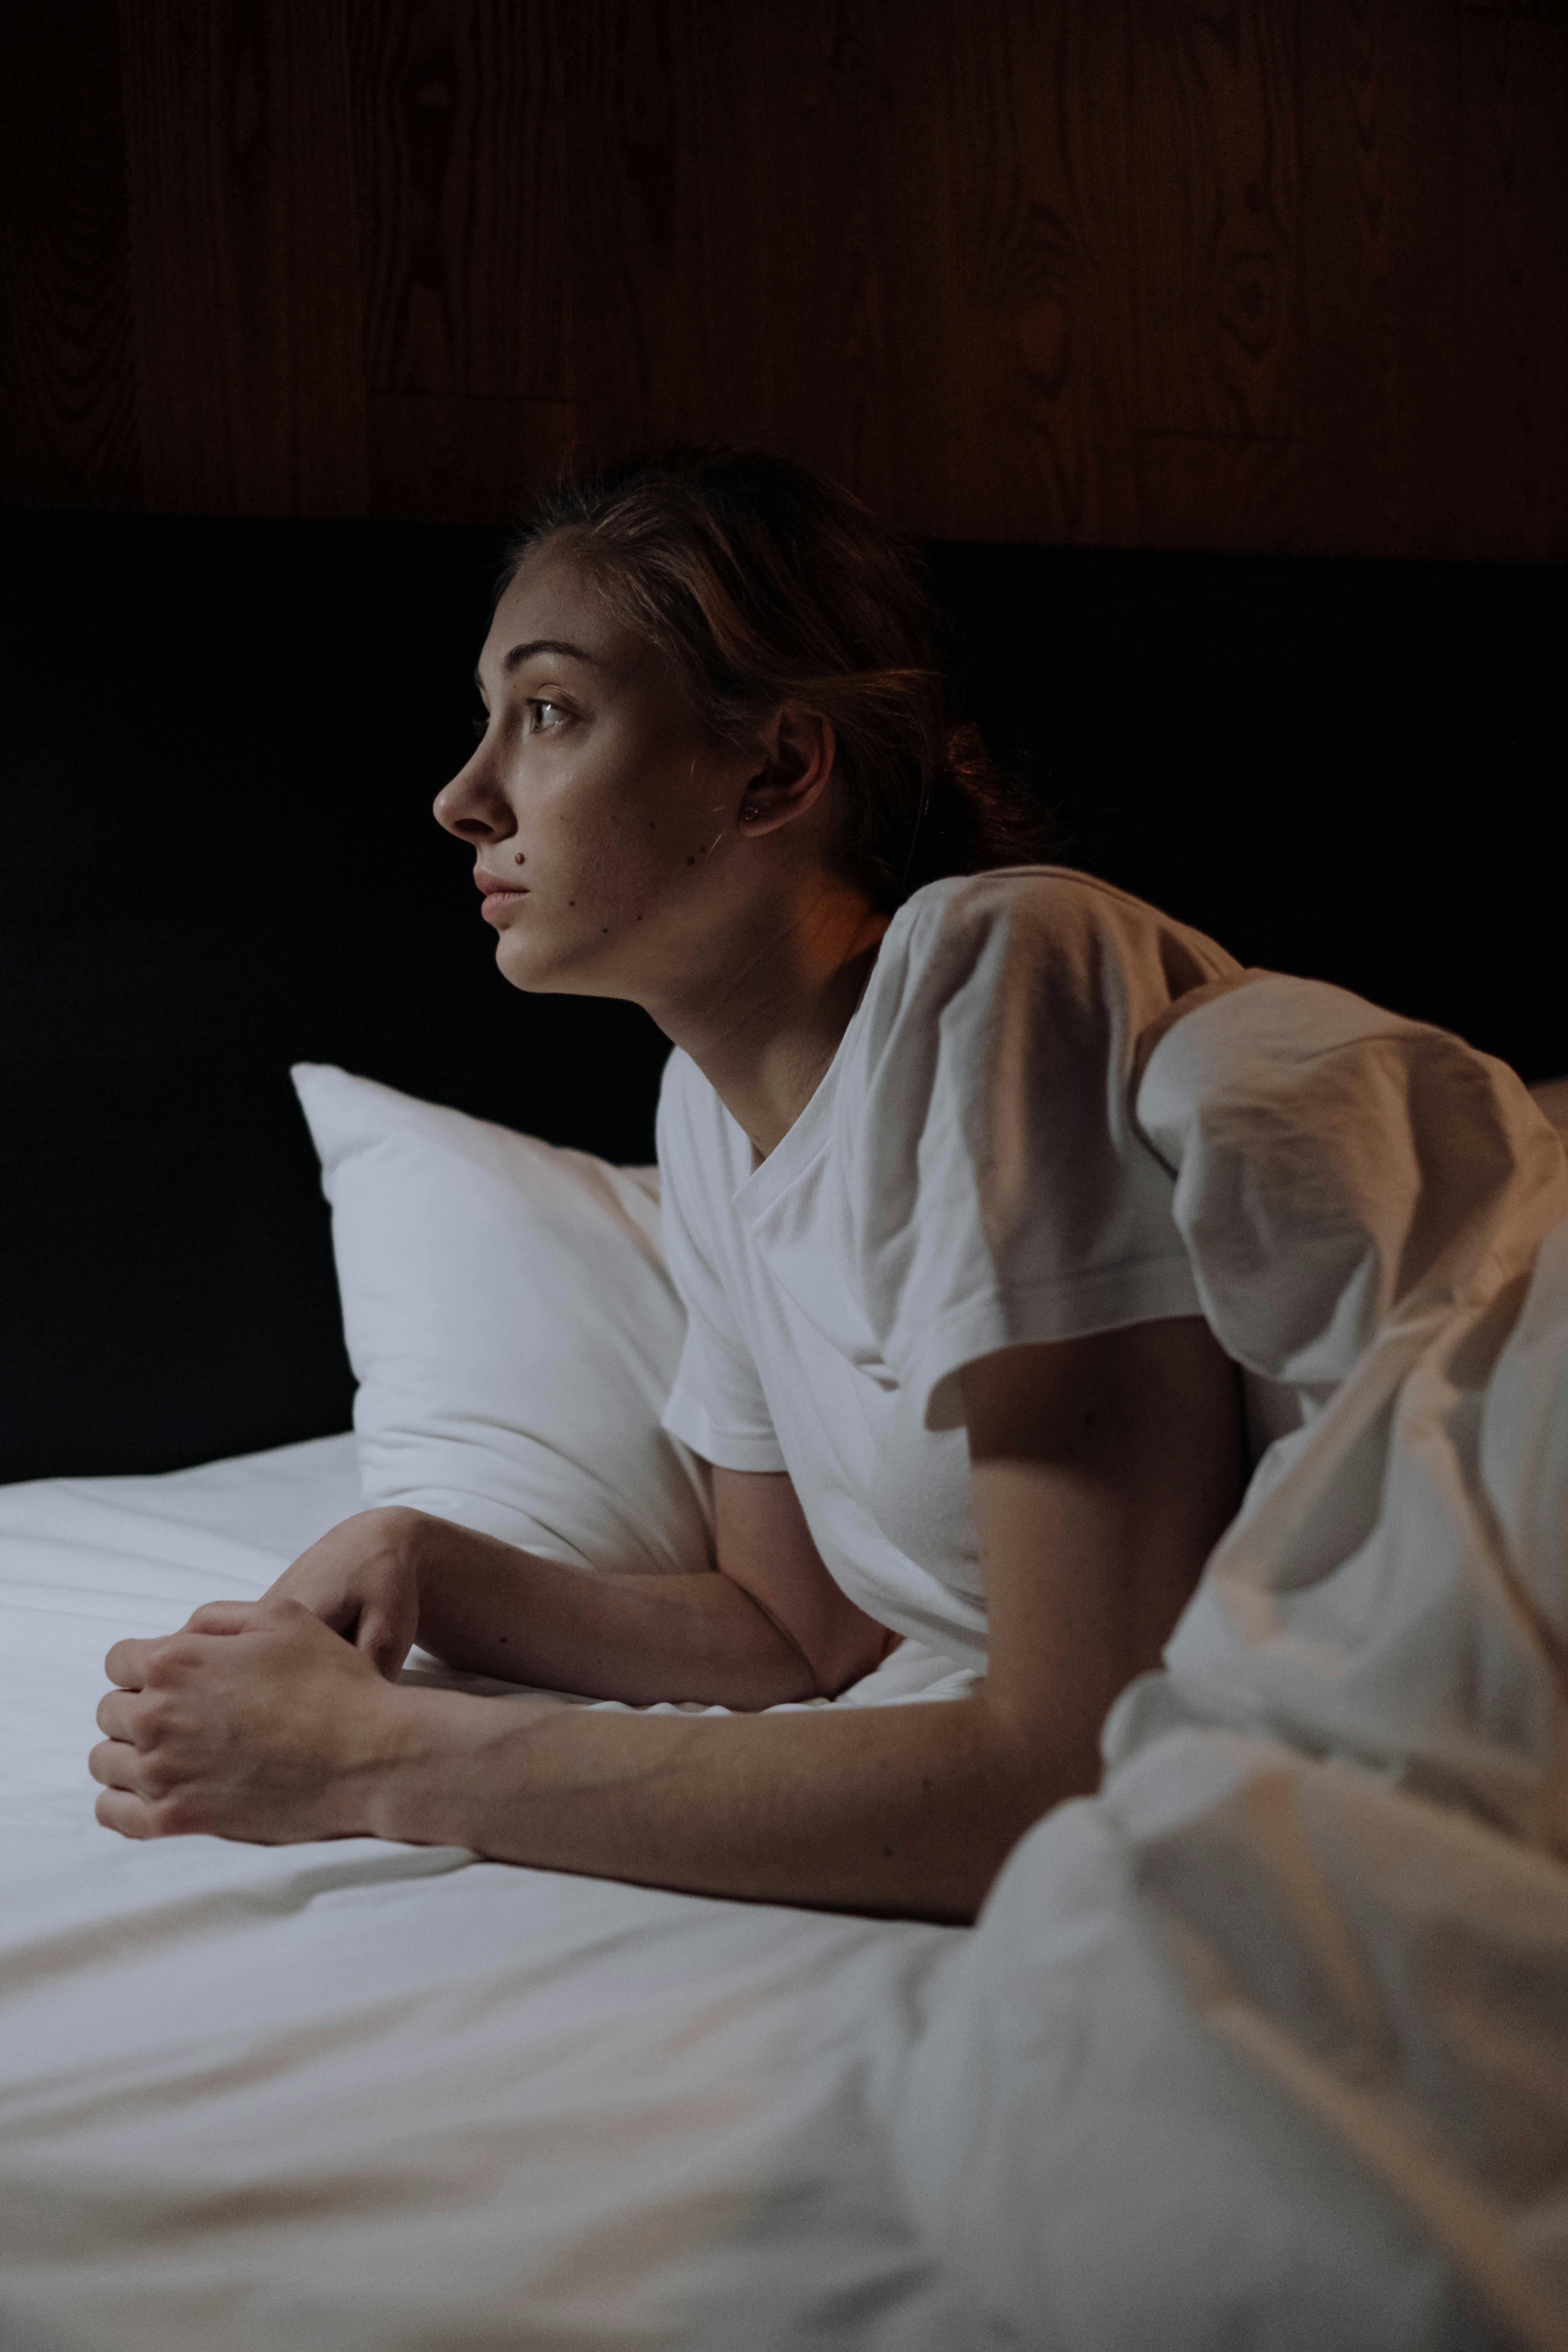 A woman awake in bed | Source: Pexels